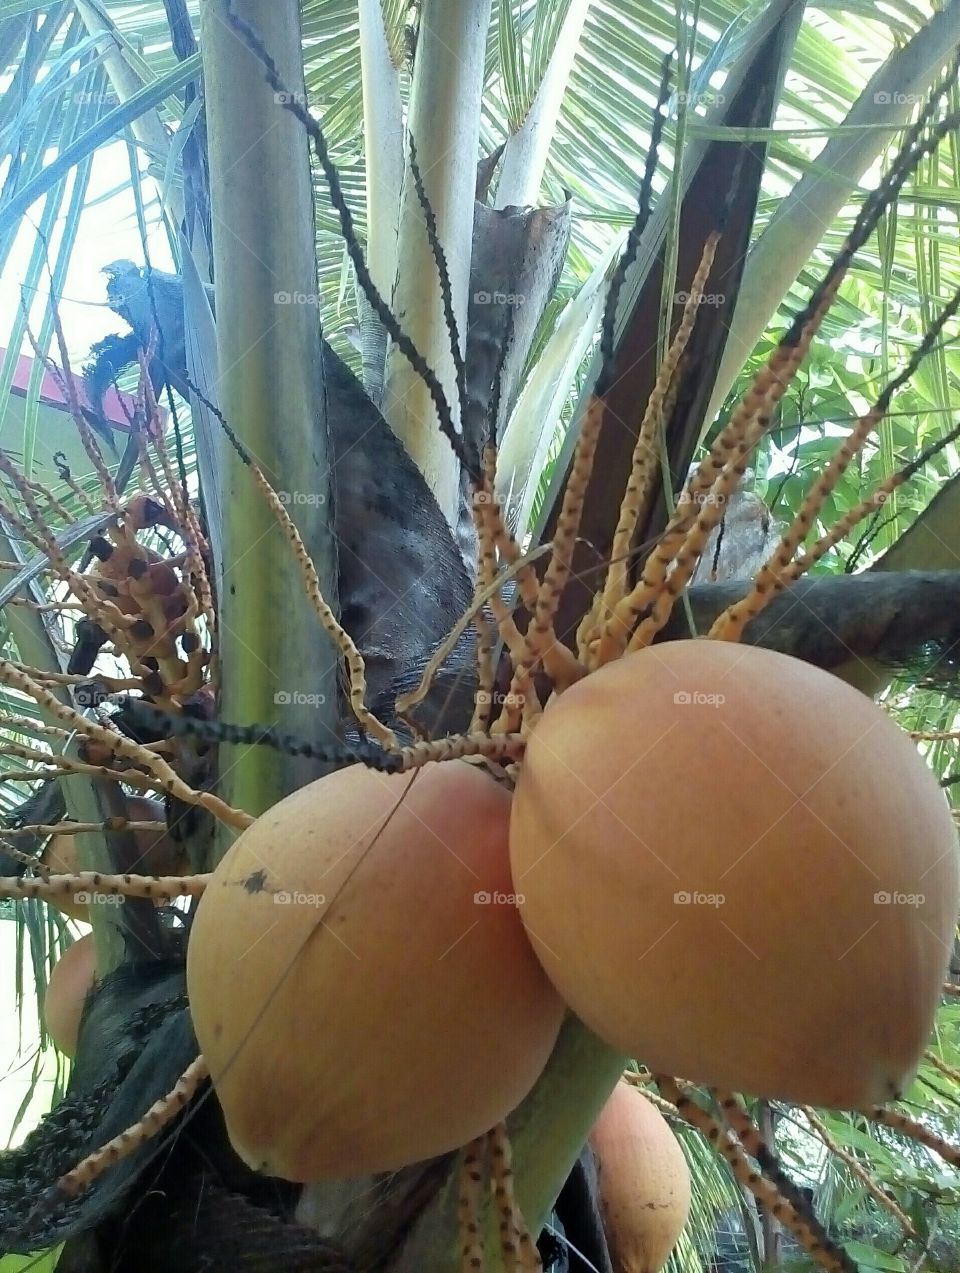 Coconut tree in a sunny day